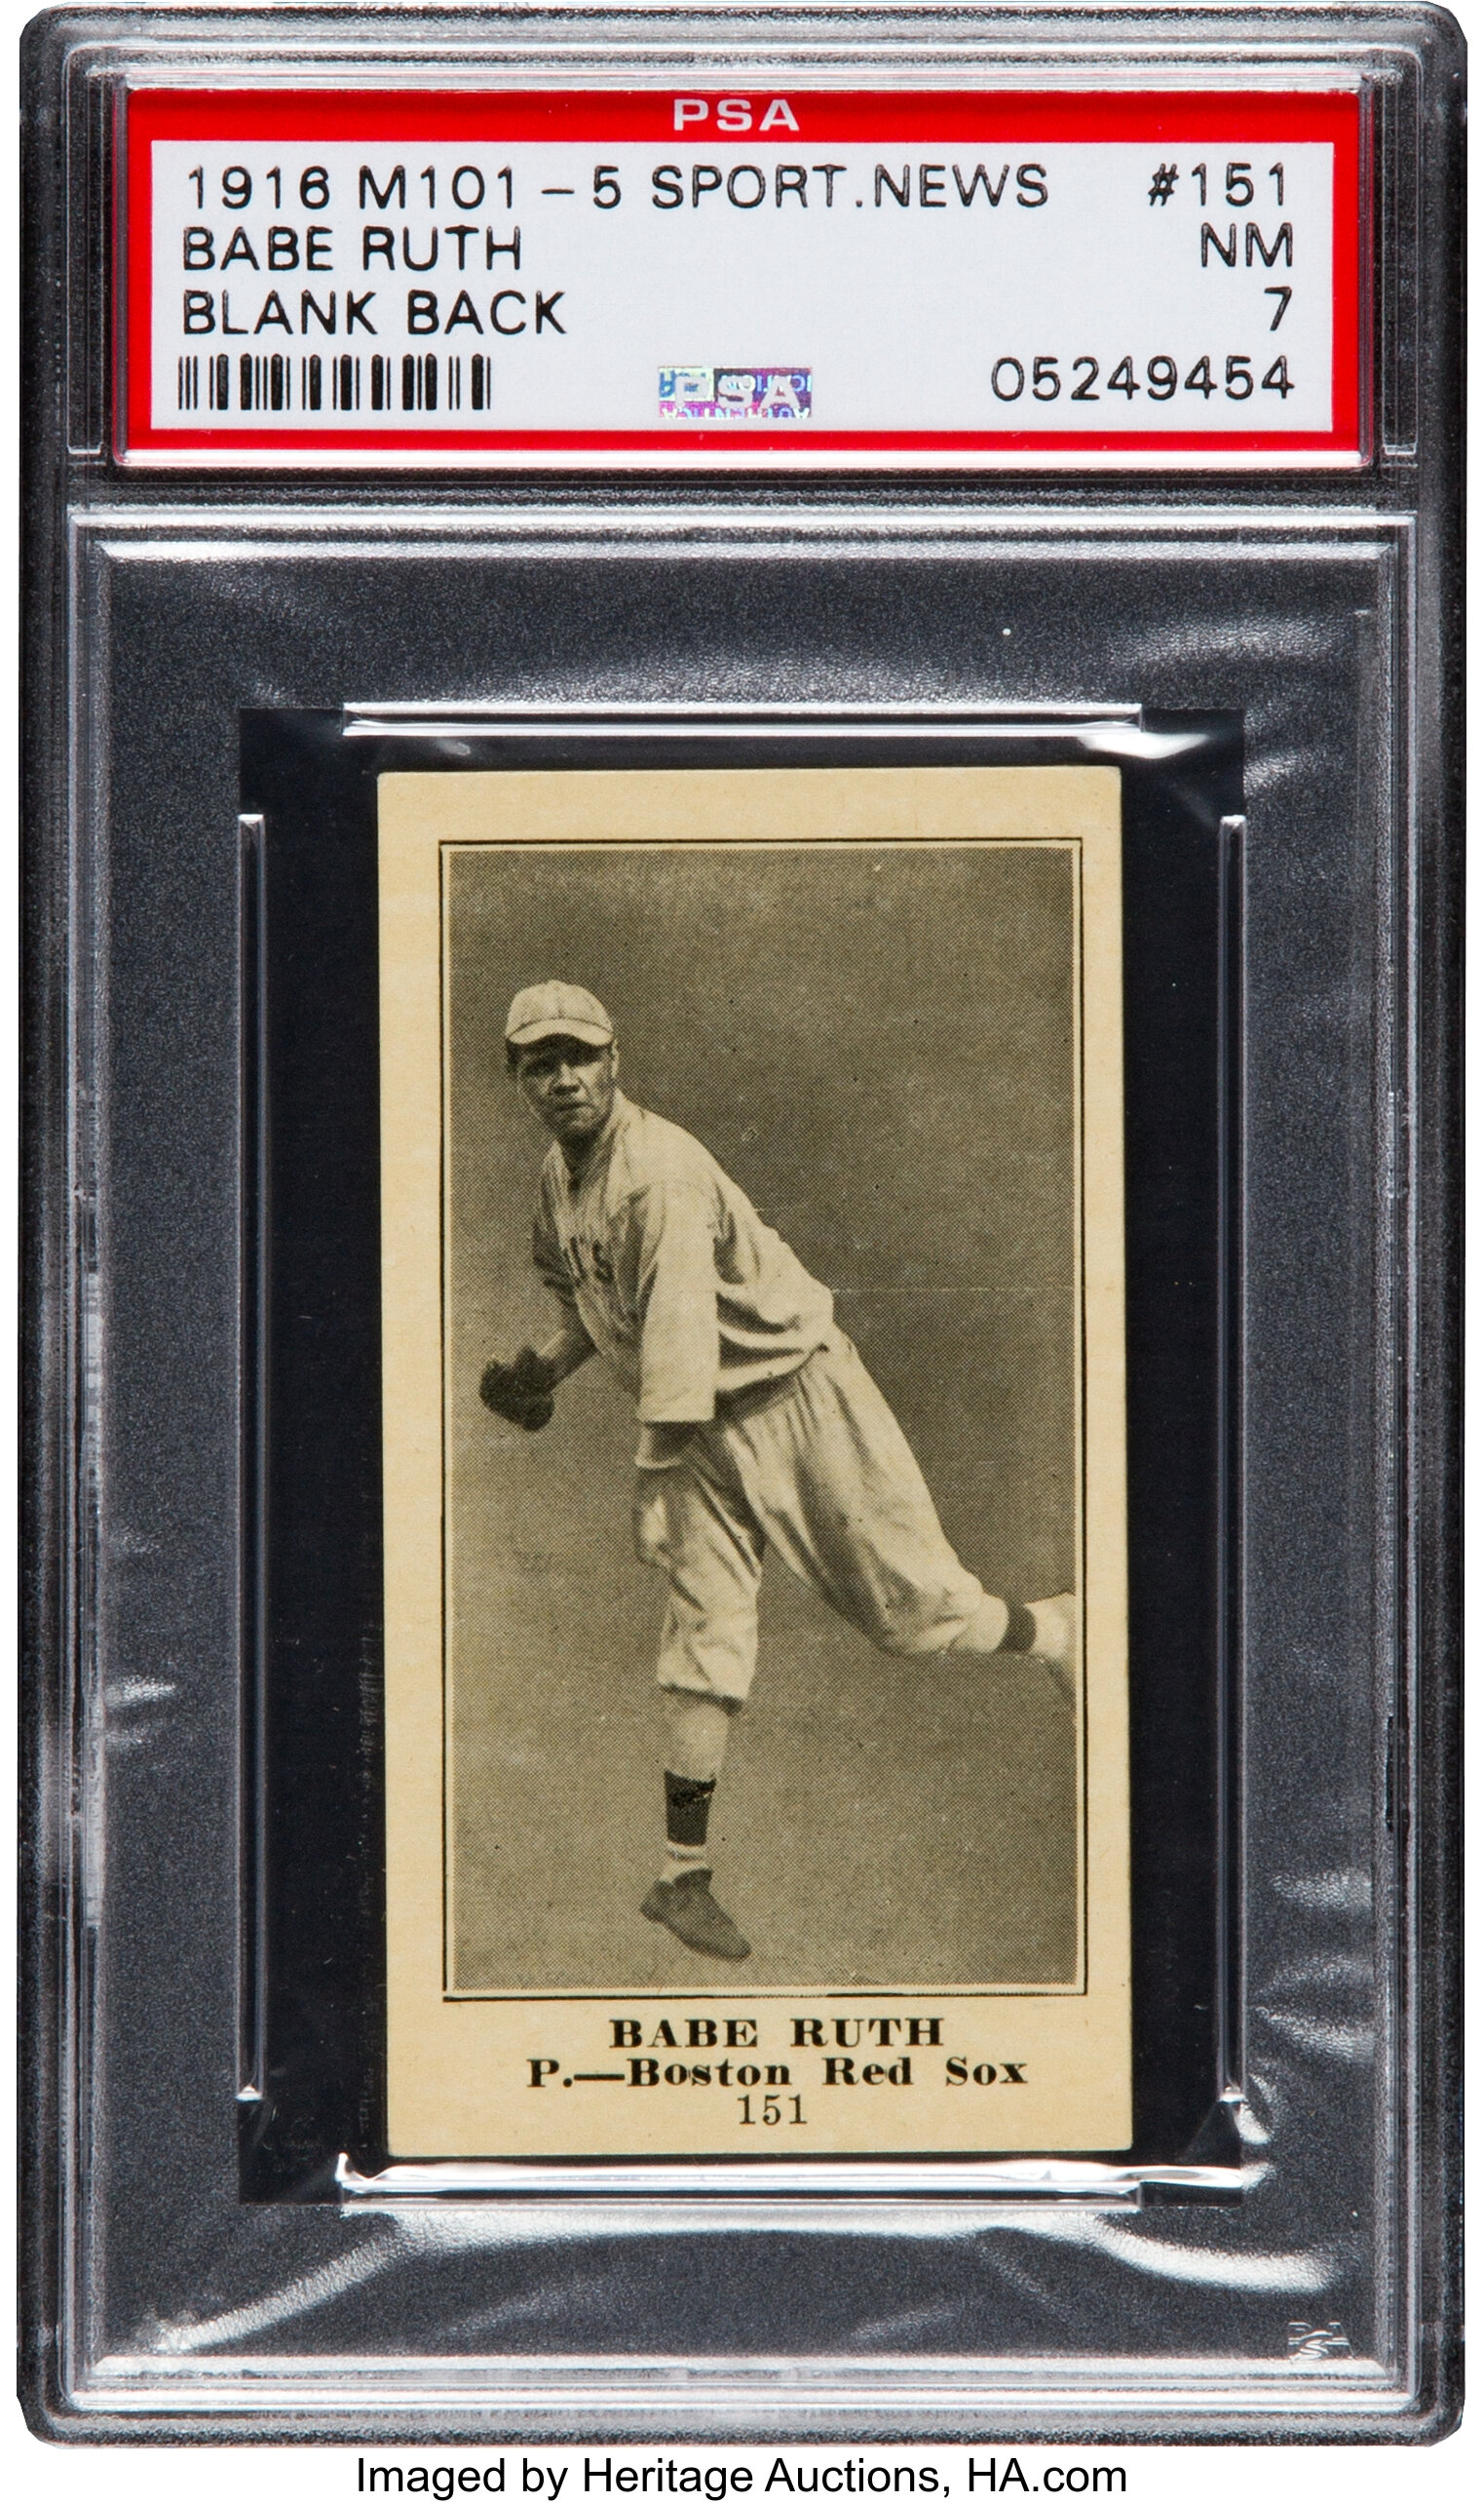 ruth babe rookie psa 1916 card cards valuable sports m101 baseball sporting million